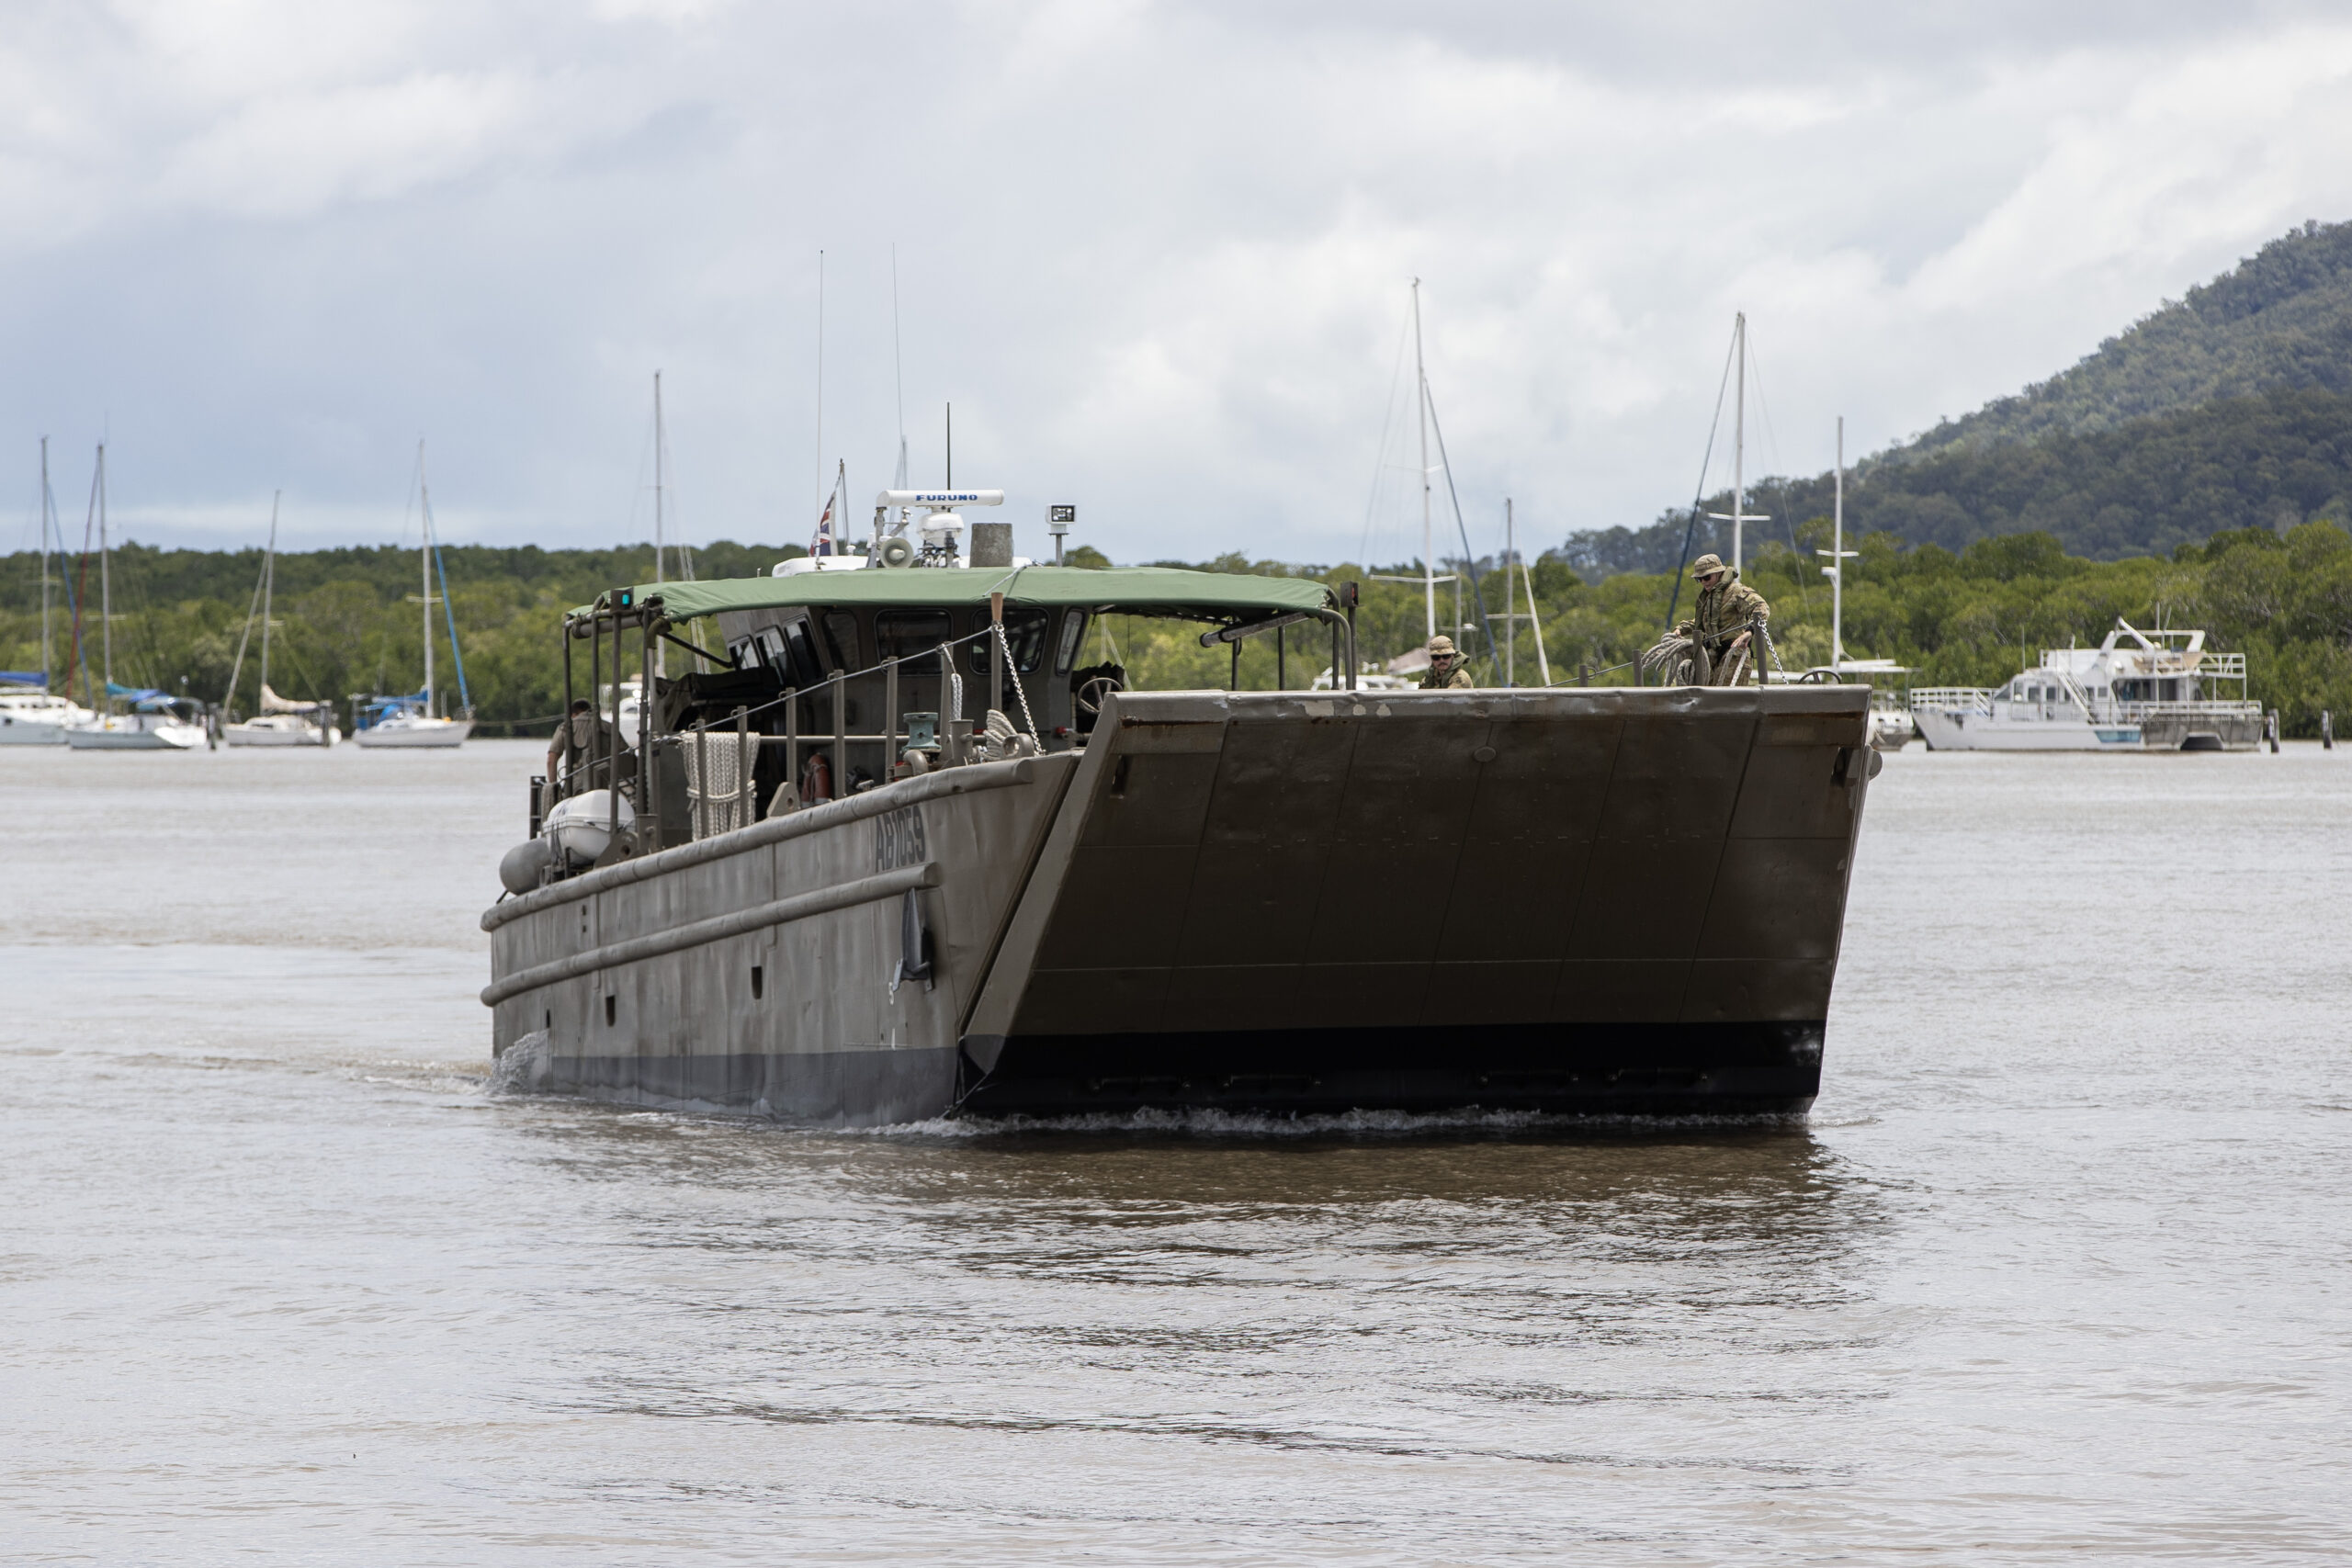 An Australian Army Landing Craft Mechanised Mk8 (LCM8) from 10 Forces Support Battalion arrives in Cairns, Queensland as part of Australian Defence Force support recovery efforts in the region after Ex Tropical Cyclone Jasper. *** Local Caption *** The Australian Defence Force is providing support to the Queensland Reconstruction Agency to access and resupply isolated and vulnerable communities in the vicinity of Douglas, Cook and Wujal Wujal ahead of the wet season. Defence is providing Australian Army CH-47F Chinook helicopters and a landing craft to transport bulk resupply and delivery of engineering equipment into isolated communities currently recovering from Ex-Tropical Cyclone Jasper. Additionally, Defence will provide personnel and equipment to help clear access and larger scale debris to isolated communities, as well as specialist aviation and maritime planning and light engineering support.